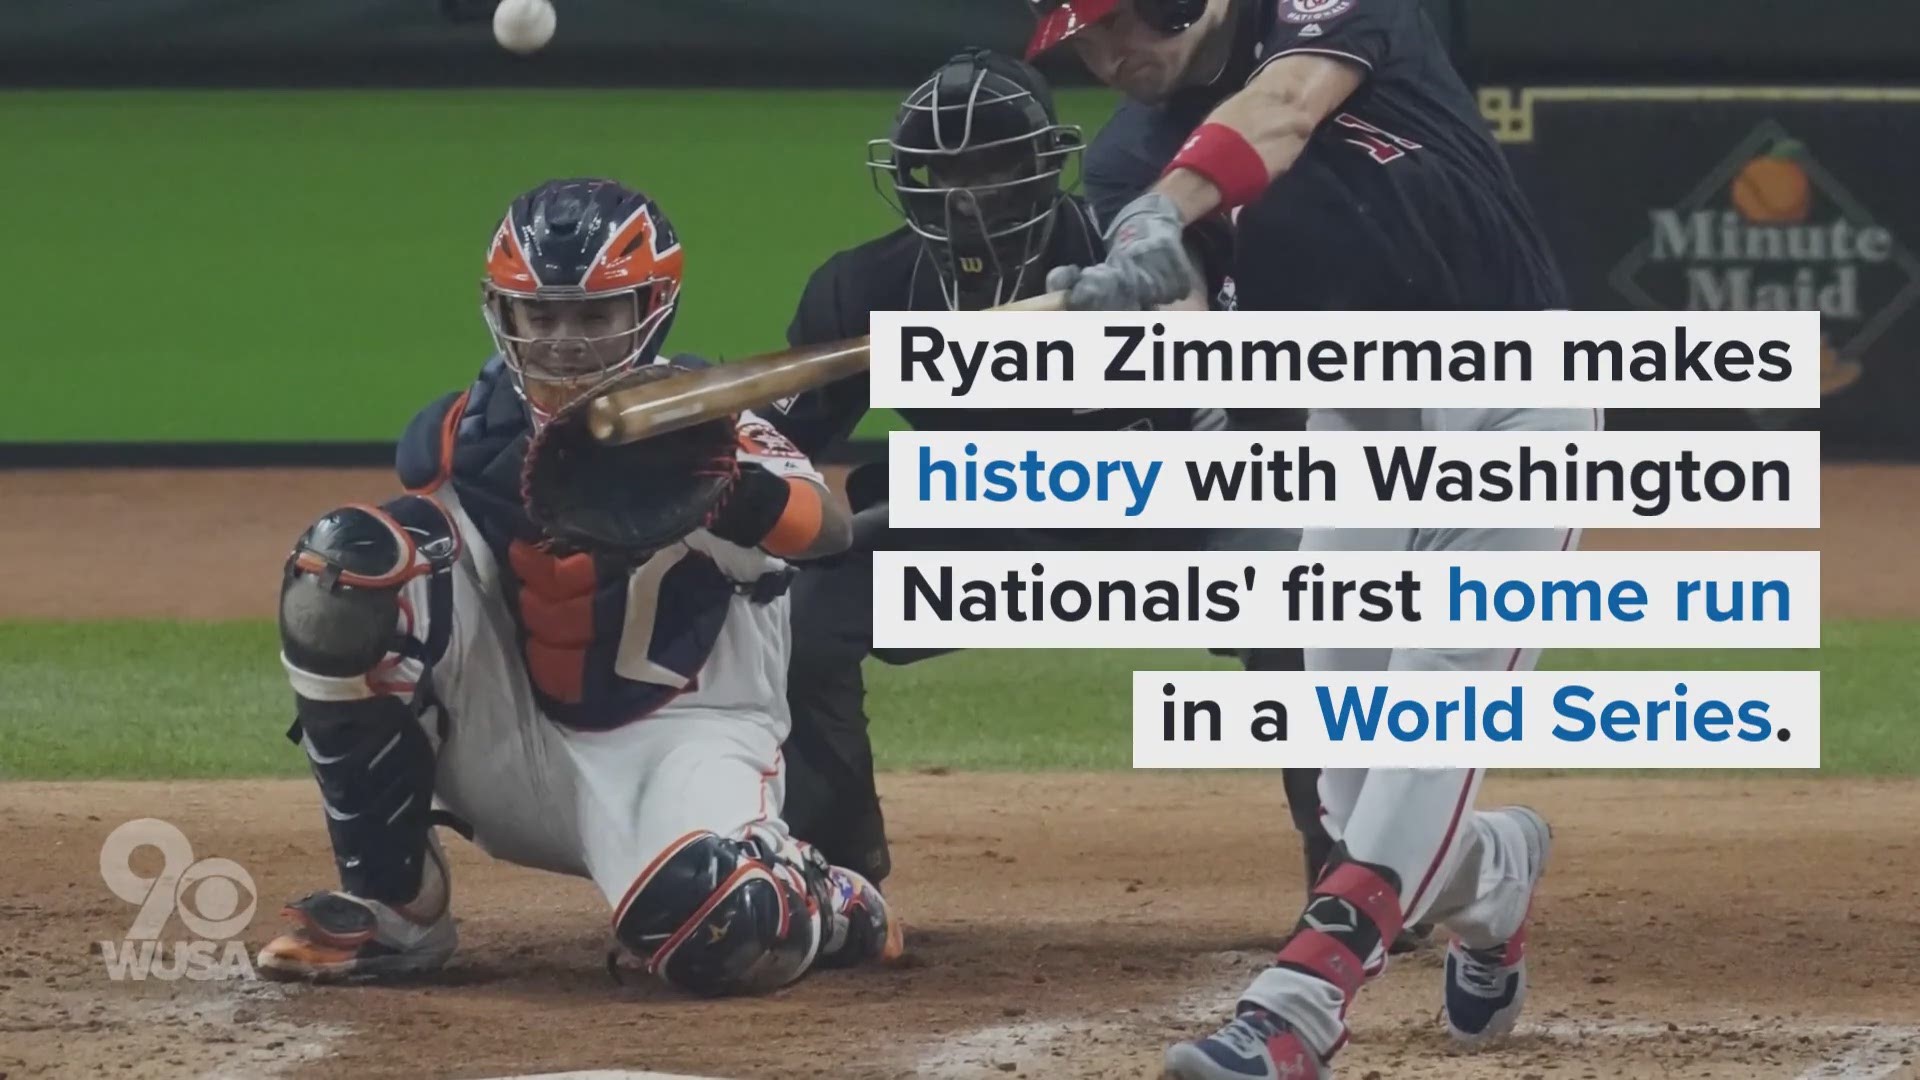 Ryan Zimmerman became the face of the franchise. This is how he